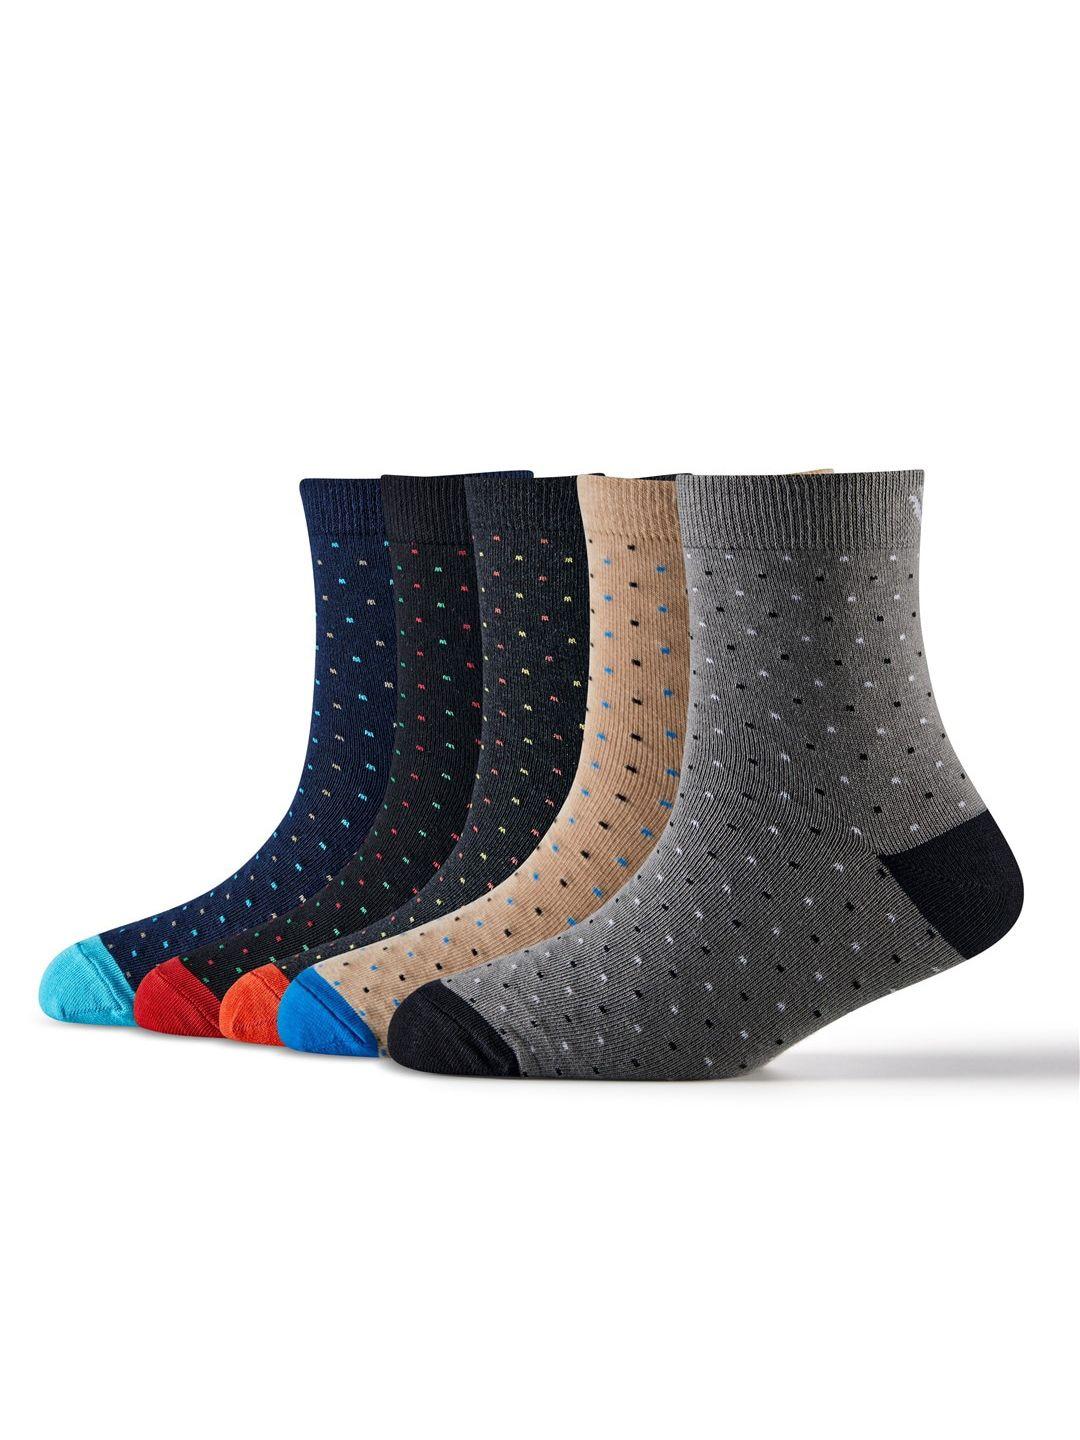 cotstyle-men-pack-of-5-patterned-assorted-ankle-length-socks